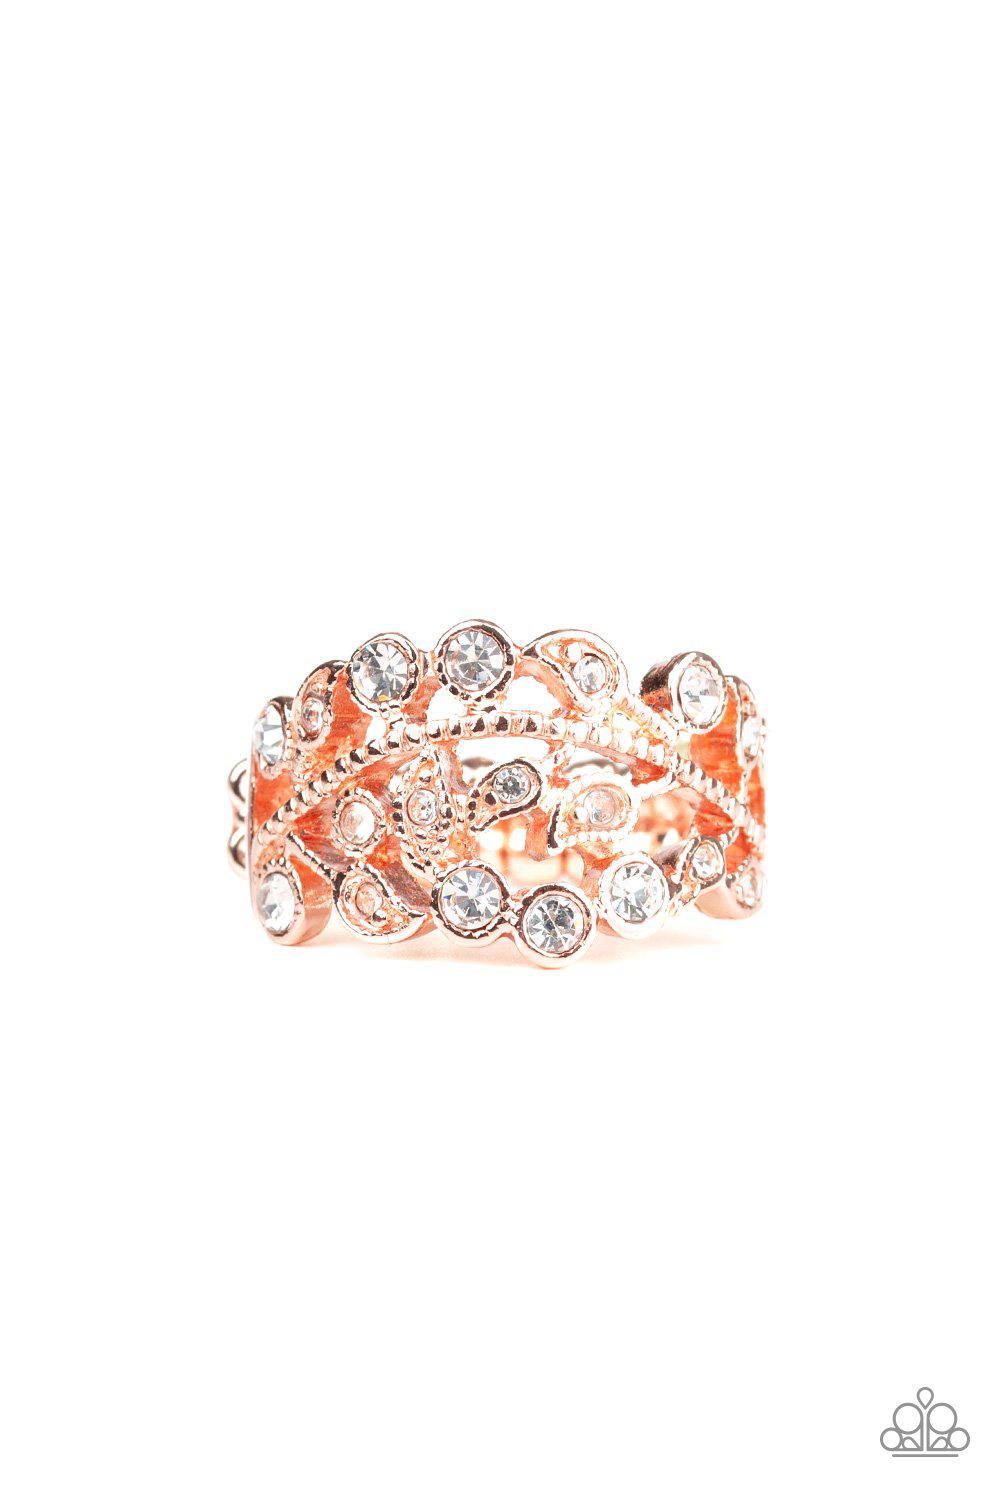 Bling Swing Copper and White Rhinestone Ring - Paparazzi Accessories-CarasShop.com - $5 Jewelry by Cara Jewels